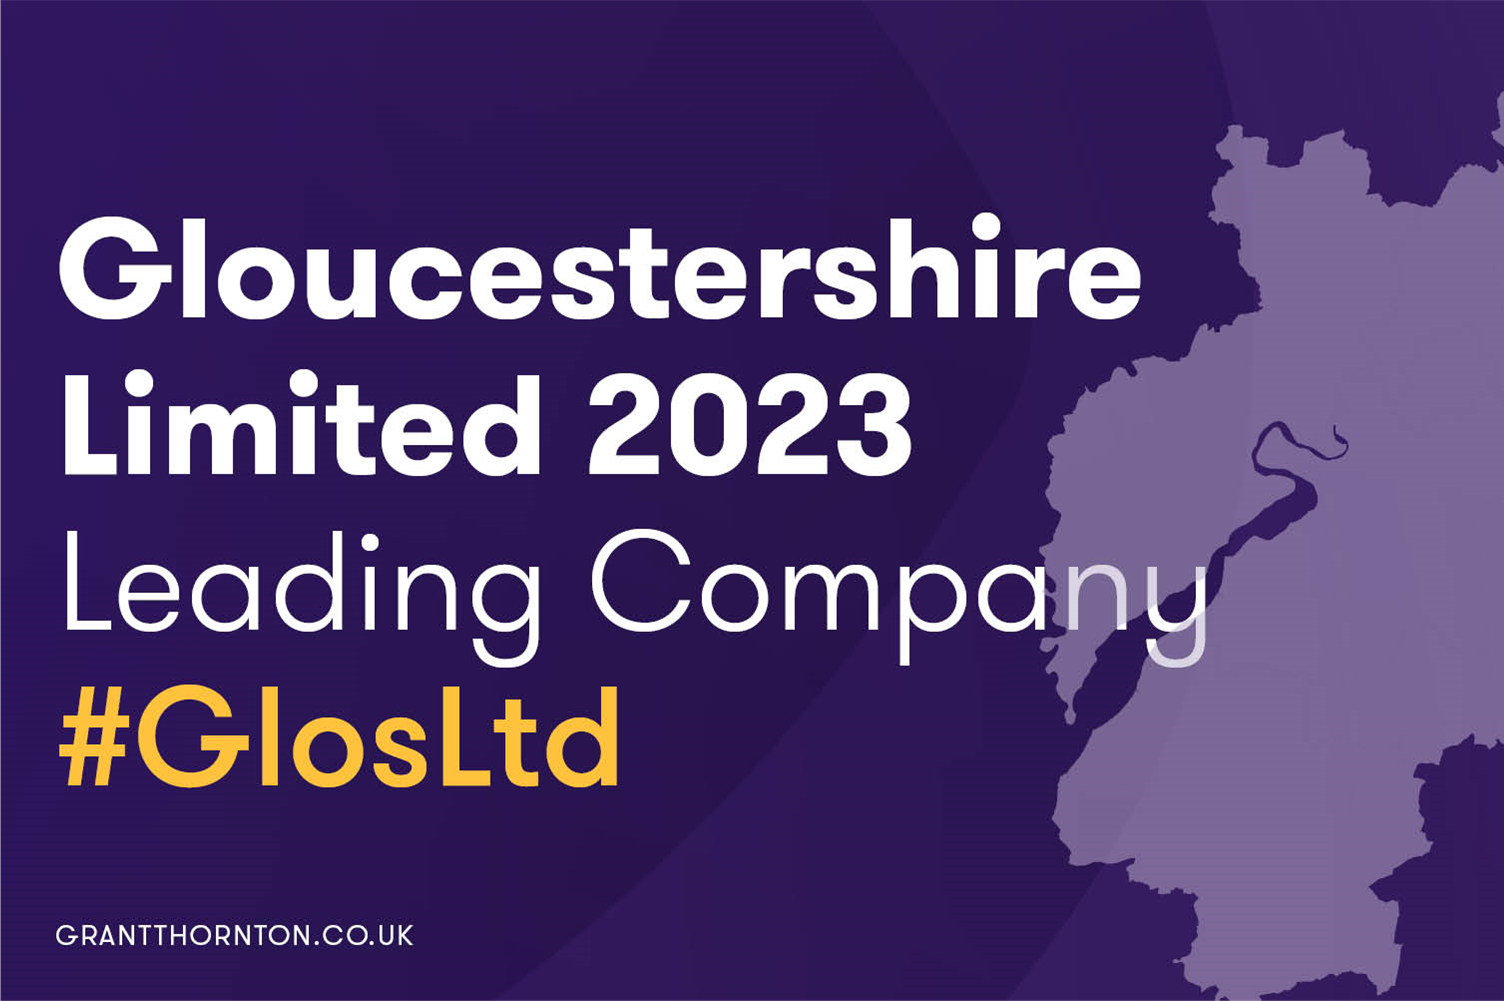 Gloucestershire Limited 2023 - Newland Homes @ no26 #GlosLtd New homes in Gloucestershire